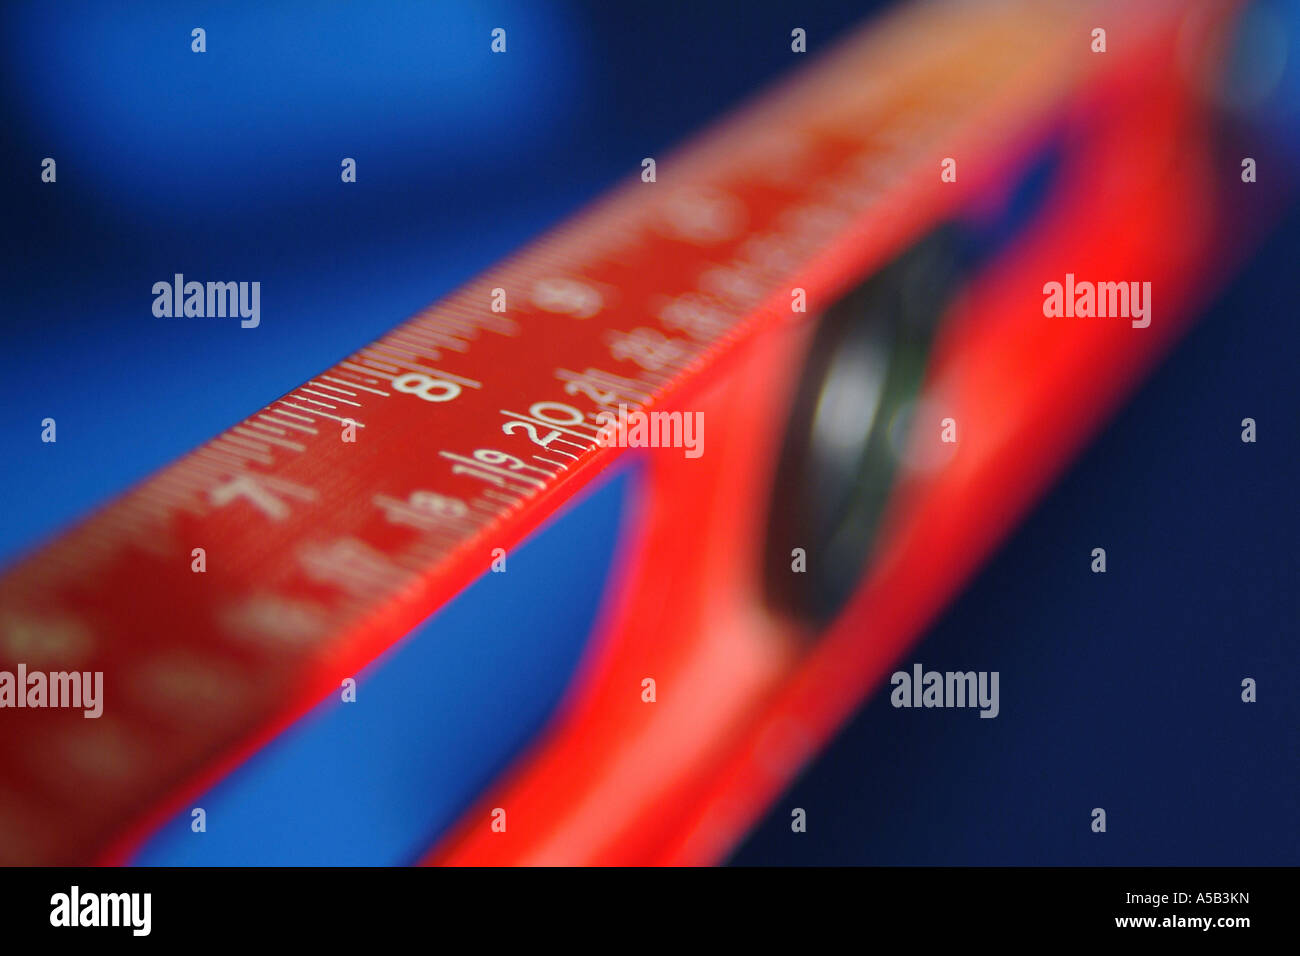 Red level and ruler combination tool. Stock Photo